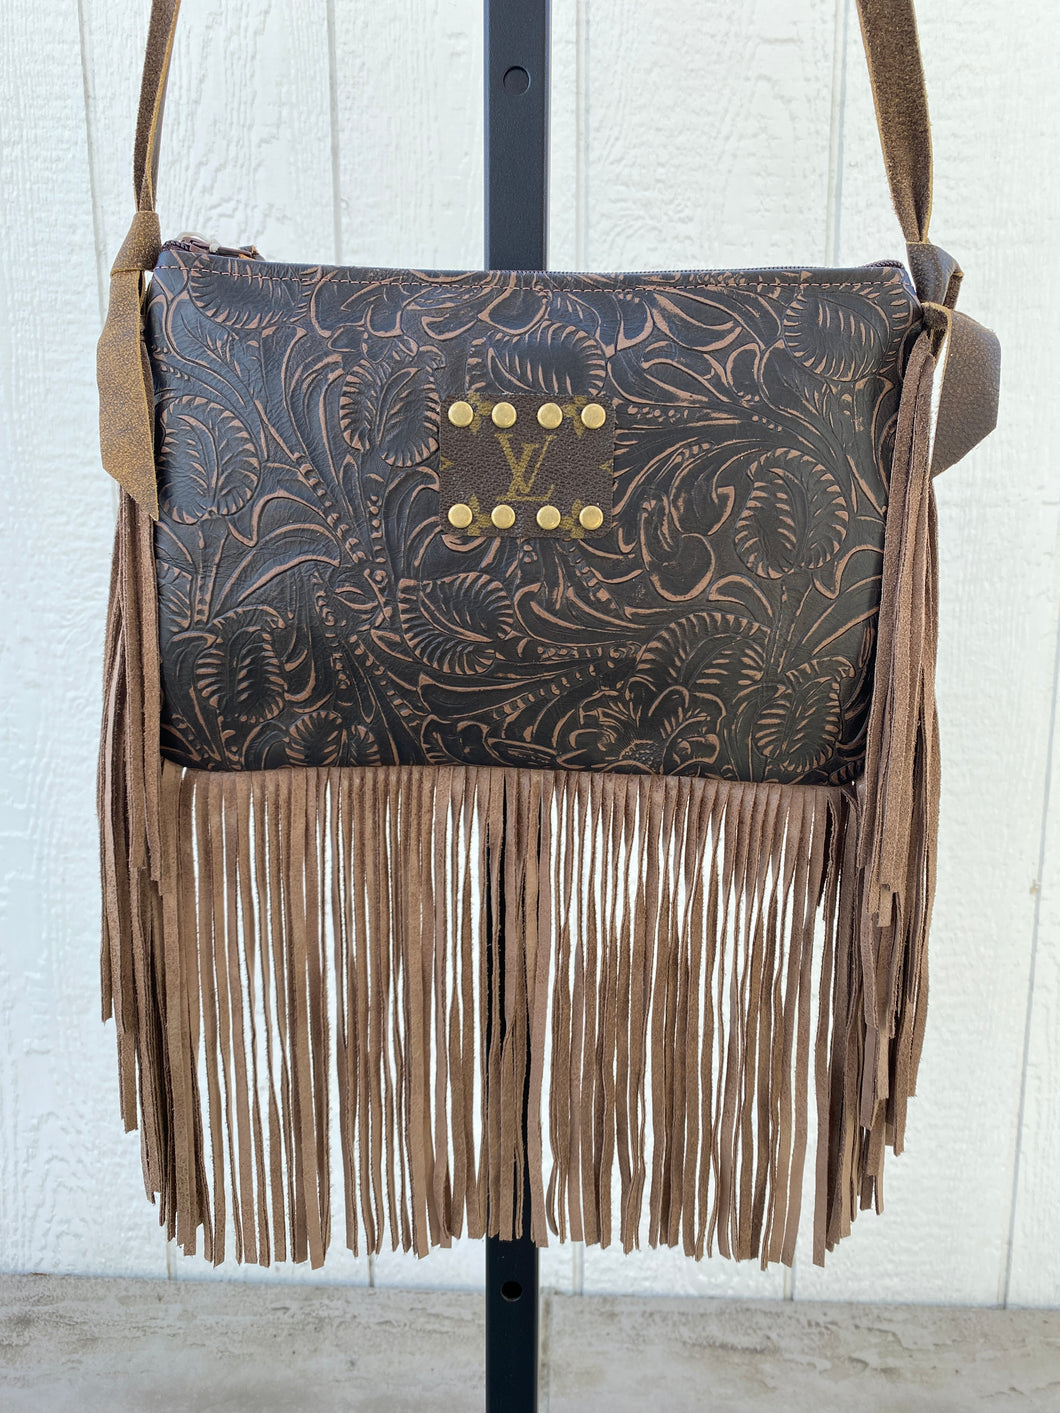 Paisley Crossbody Upcycled Leather Bag with Fringe by Keep It Gypsy